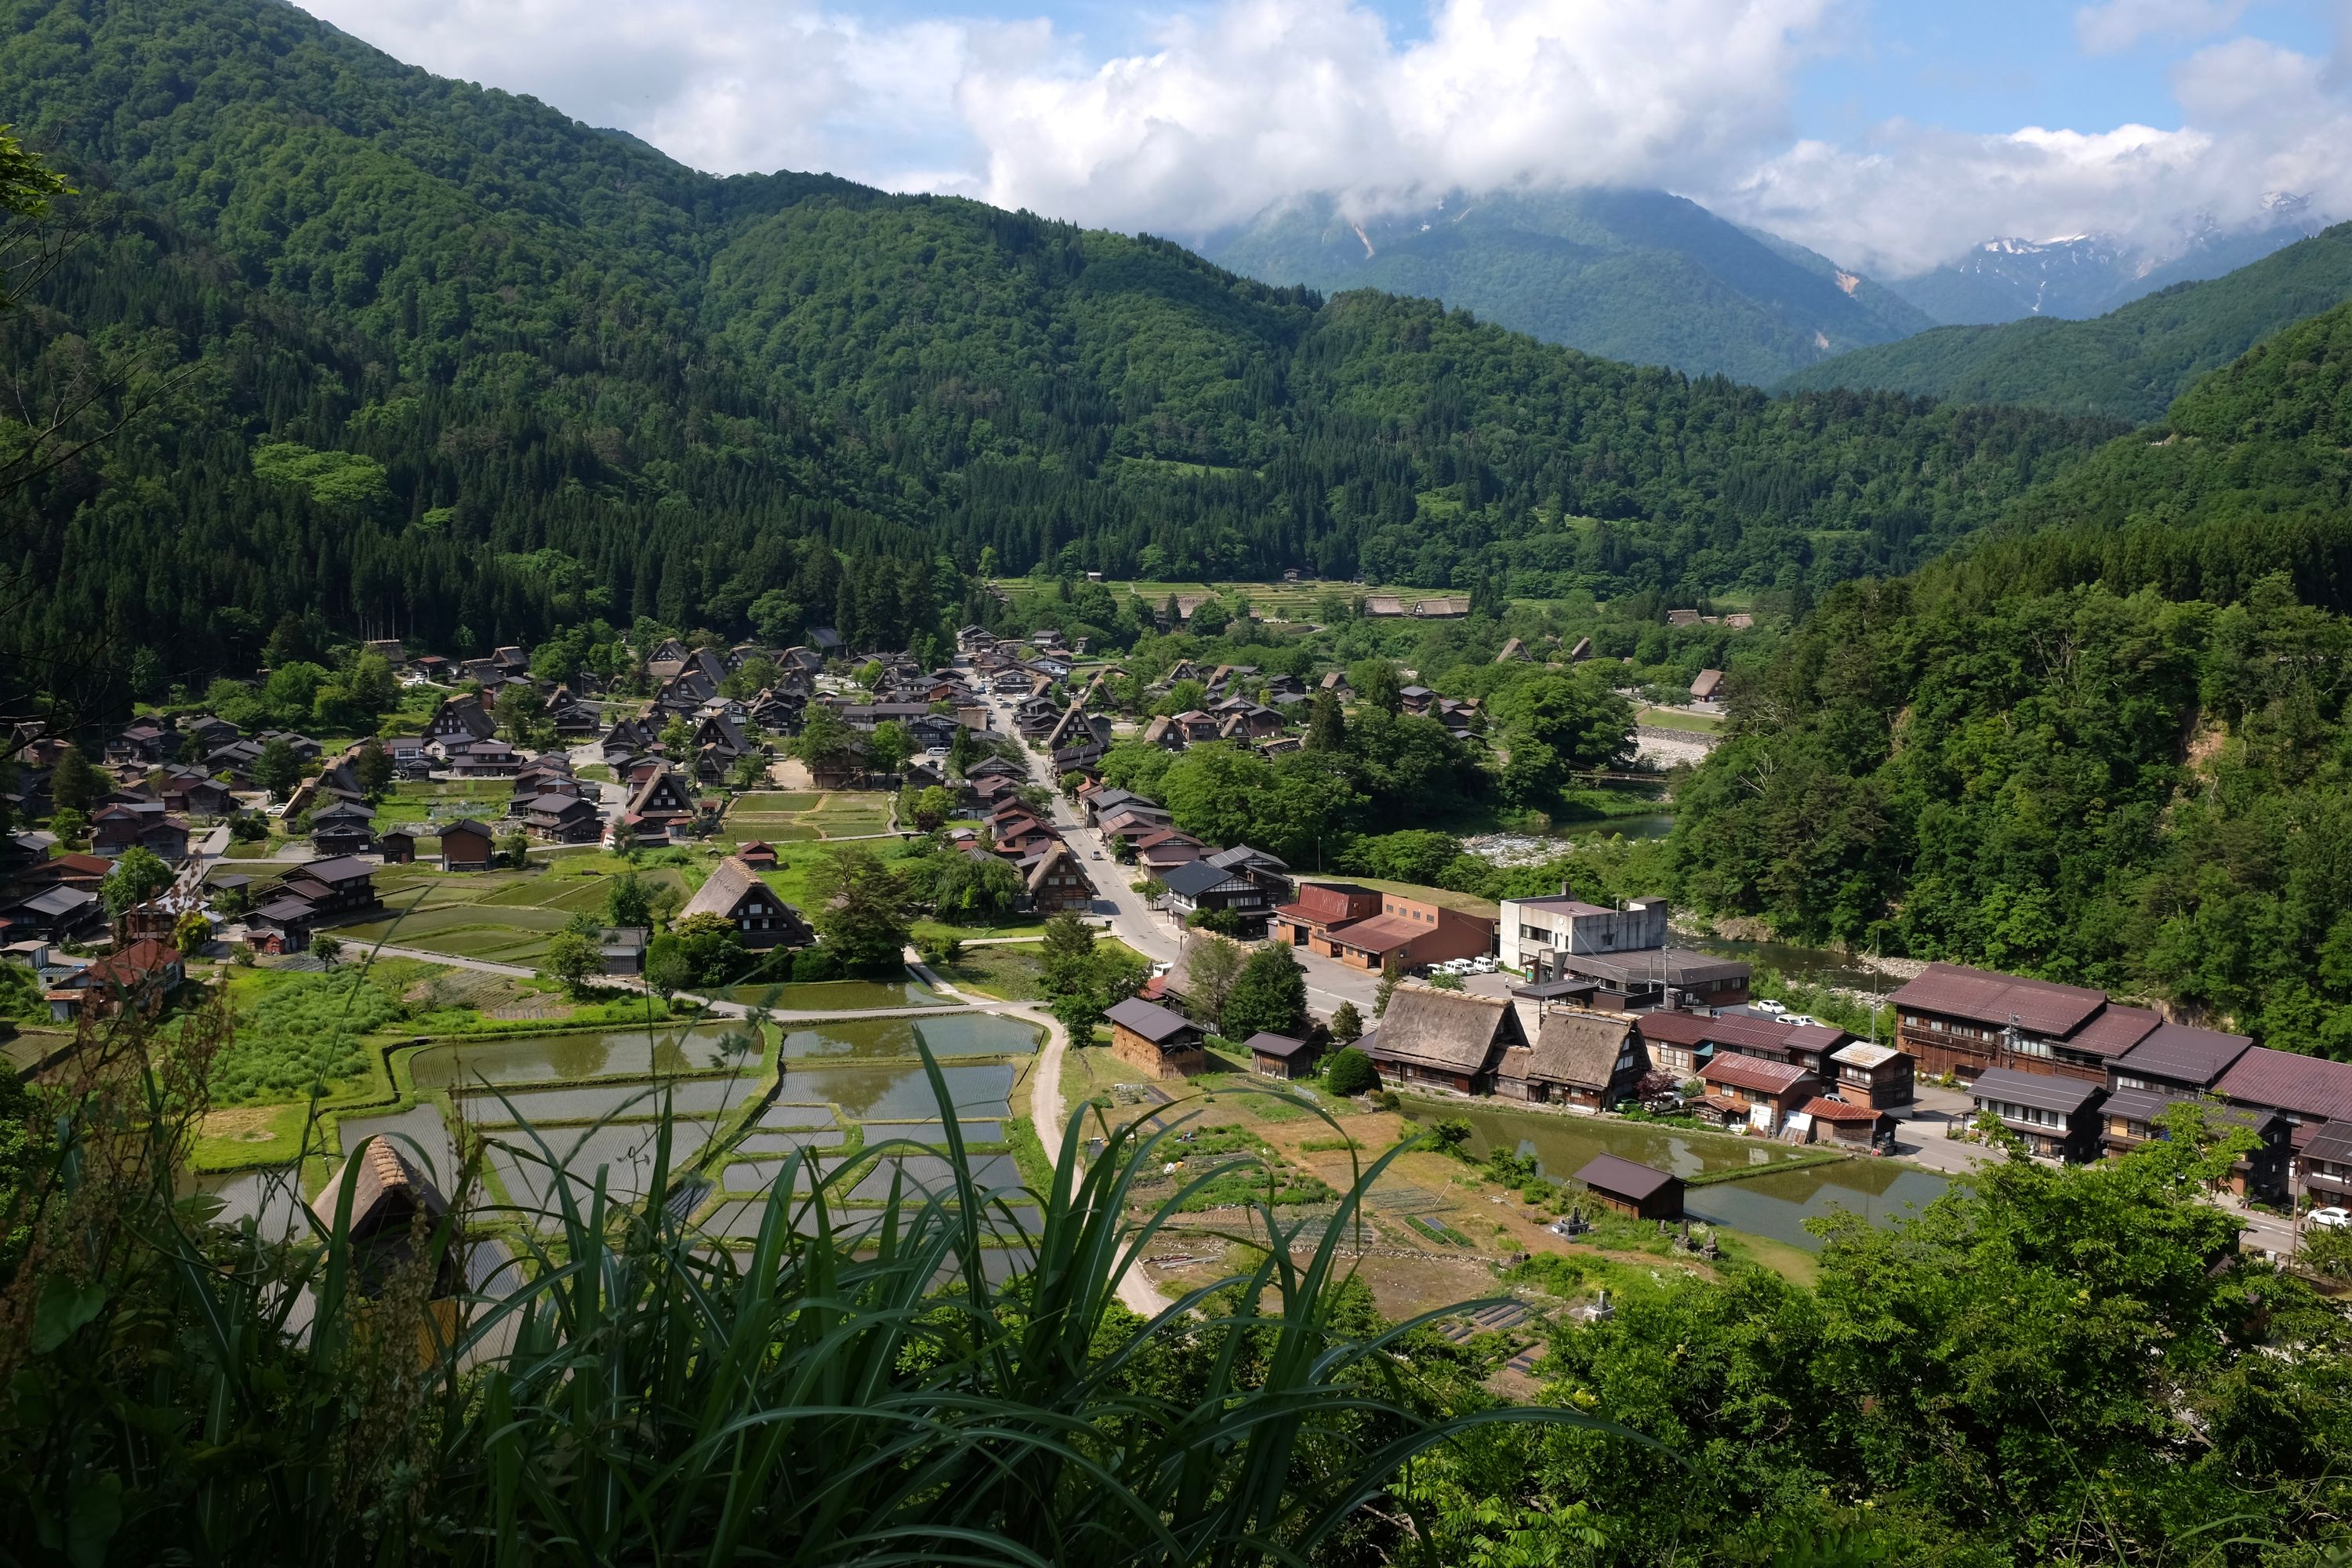 A clear view of the thatch-roofed houses of Ogimachi, with the snow peaks of Hakusan in behind them.